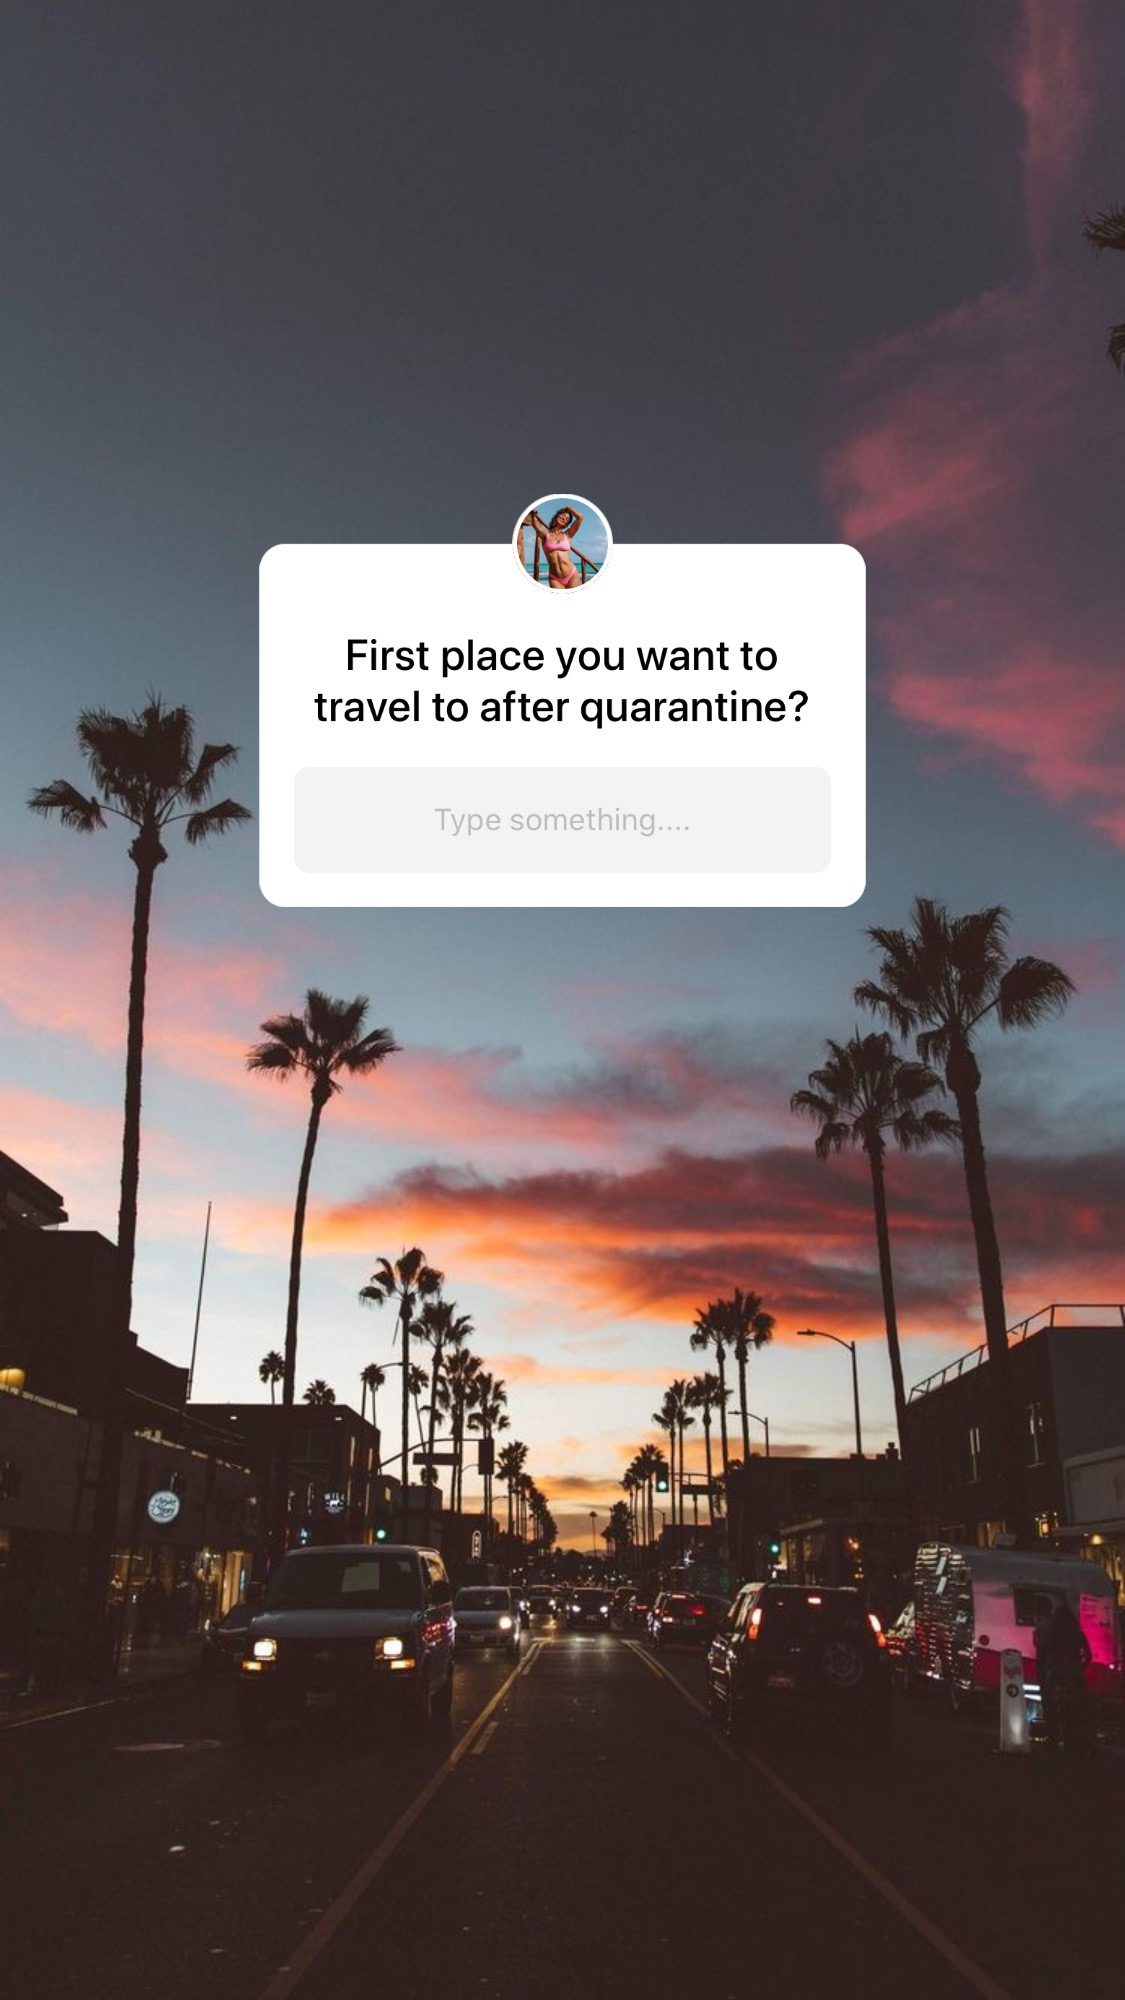 Asking my Instagram followers about their plans for the best places to travel after quarantine